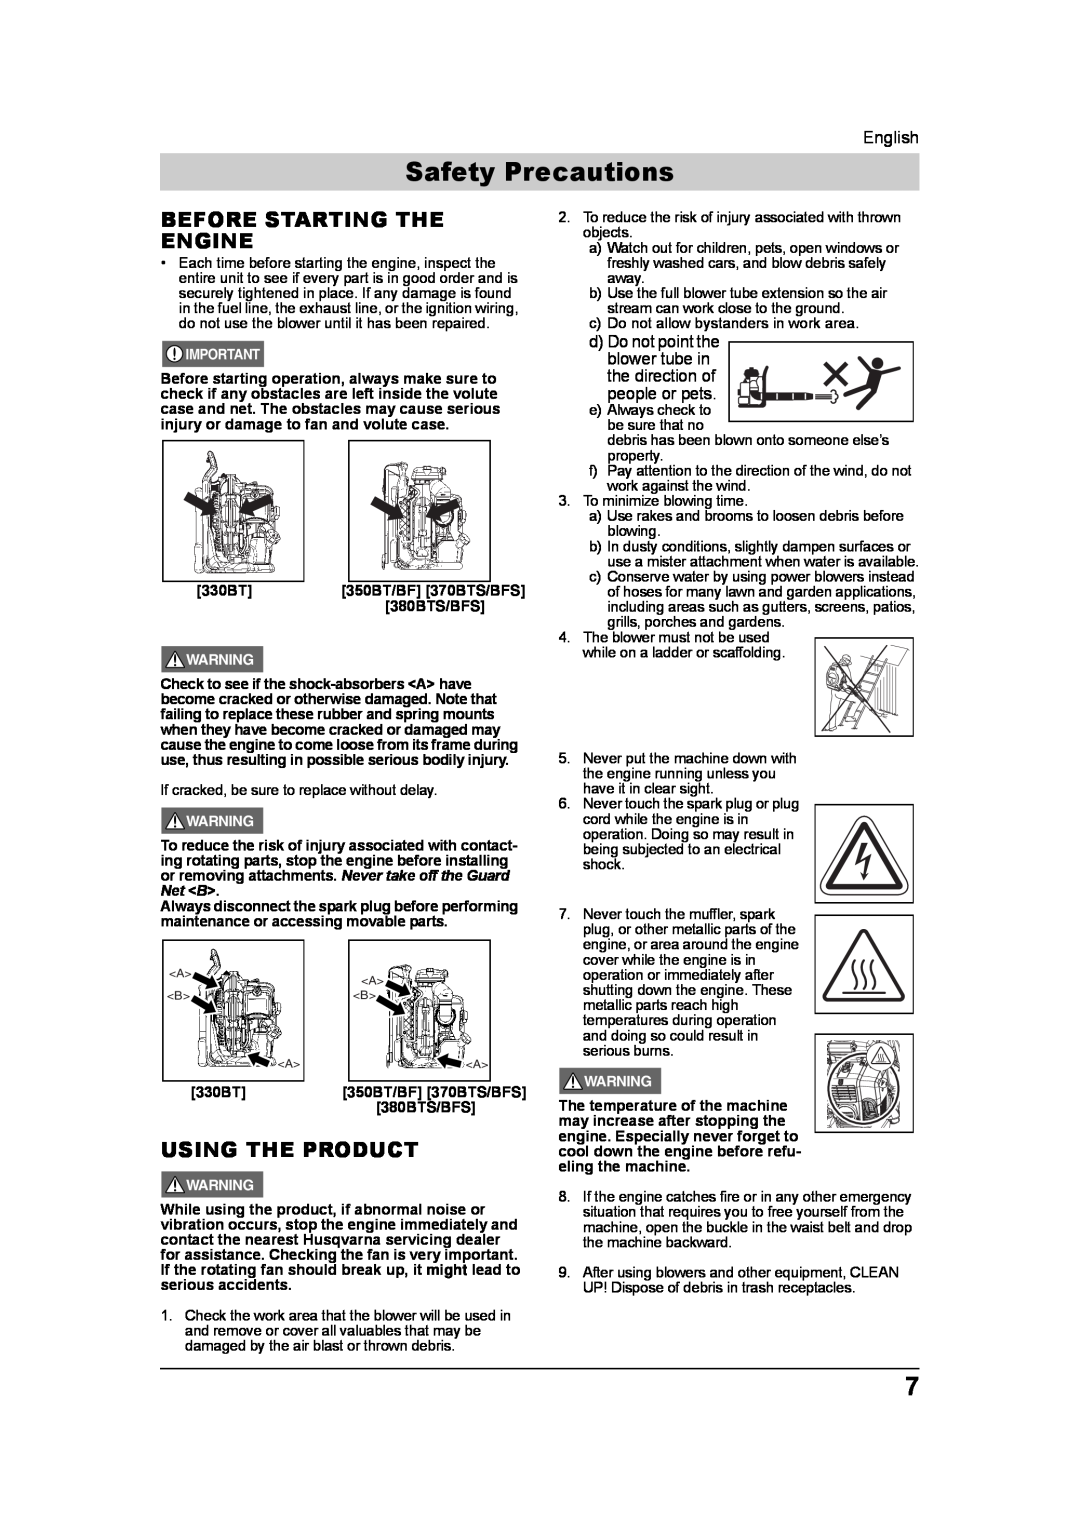 Husqvarna 370BTS/BFS, 965877502, 350BT/BF, 380BTS/BFS manual Safety Precautions, Before Starting The Engine, Using The Product 